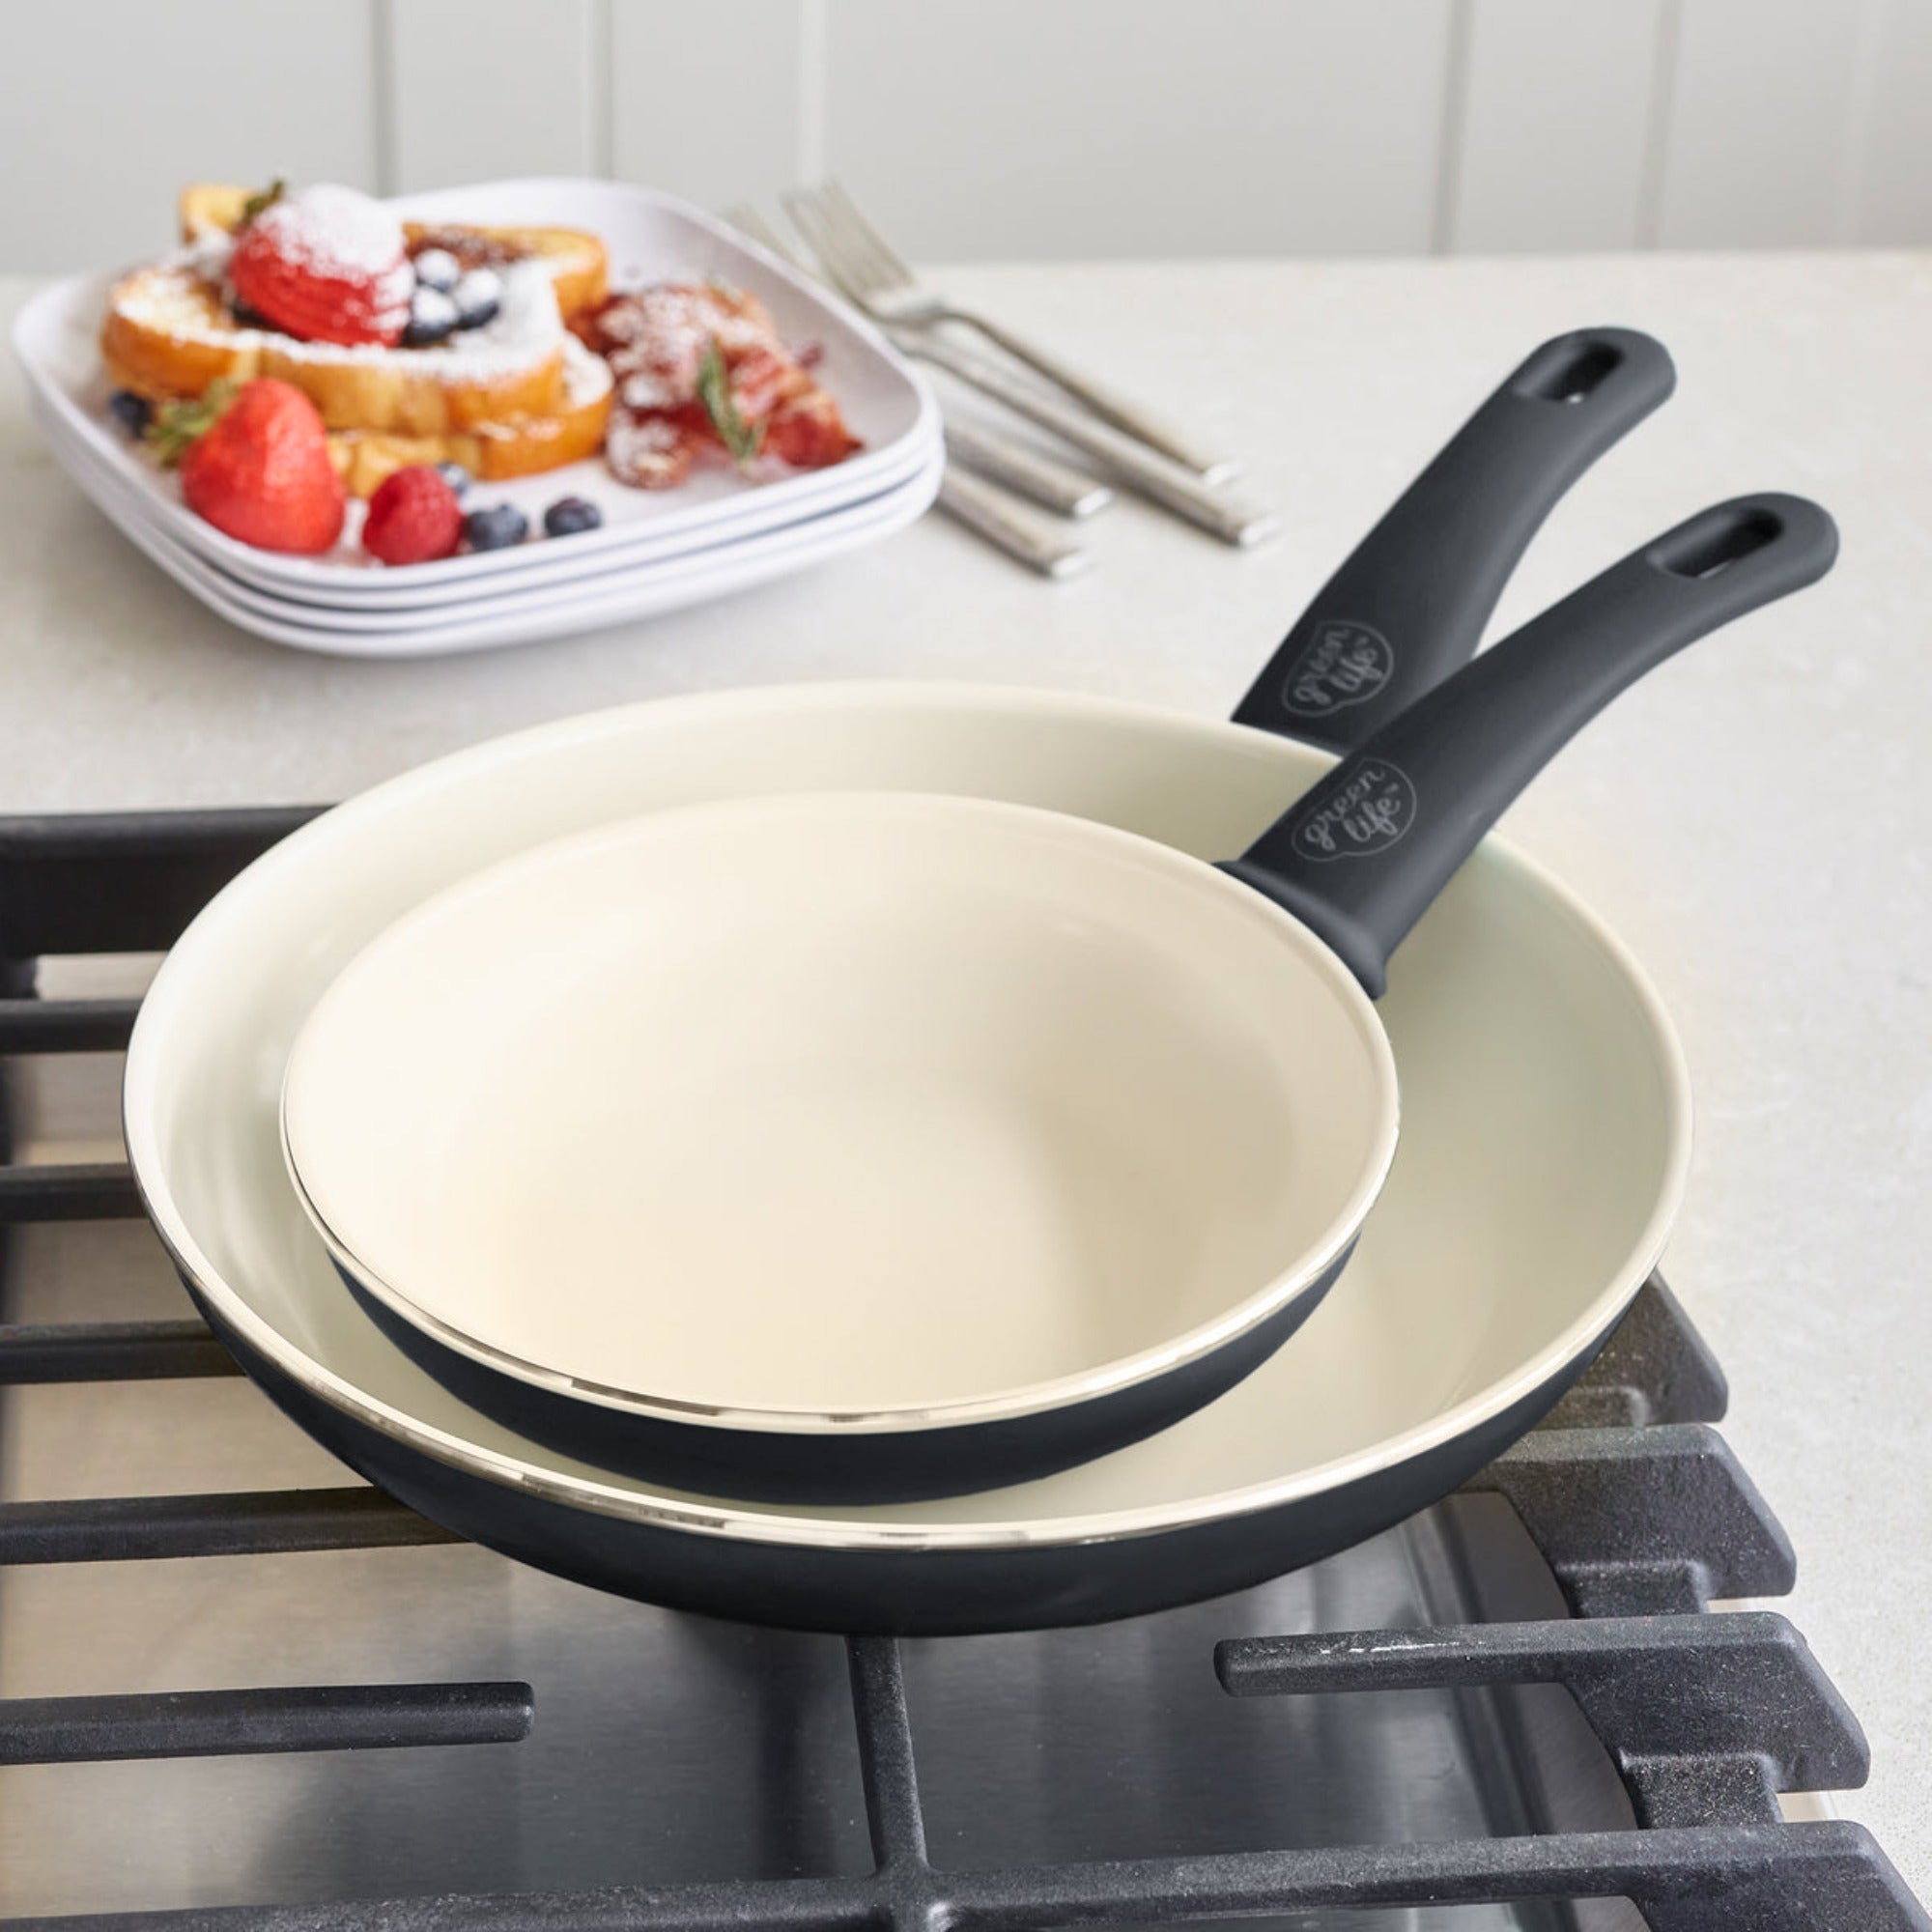 GreenLife Soft Grip Healthy Ceramic Nonstick, 7 and 10 Frying Pan Skillet Set, PFAS-Free, Dishwasher Safe, Black and Cream